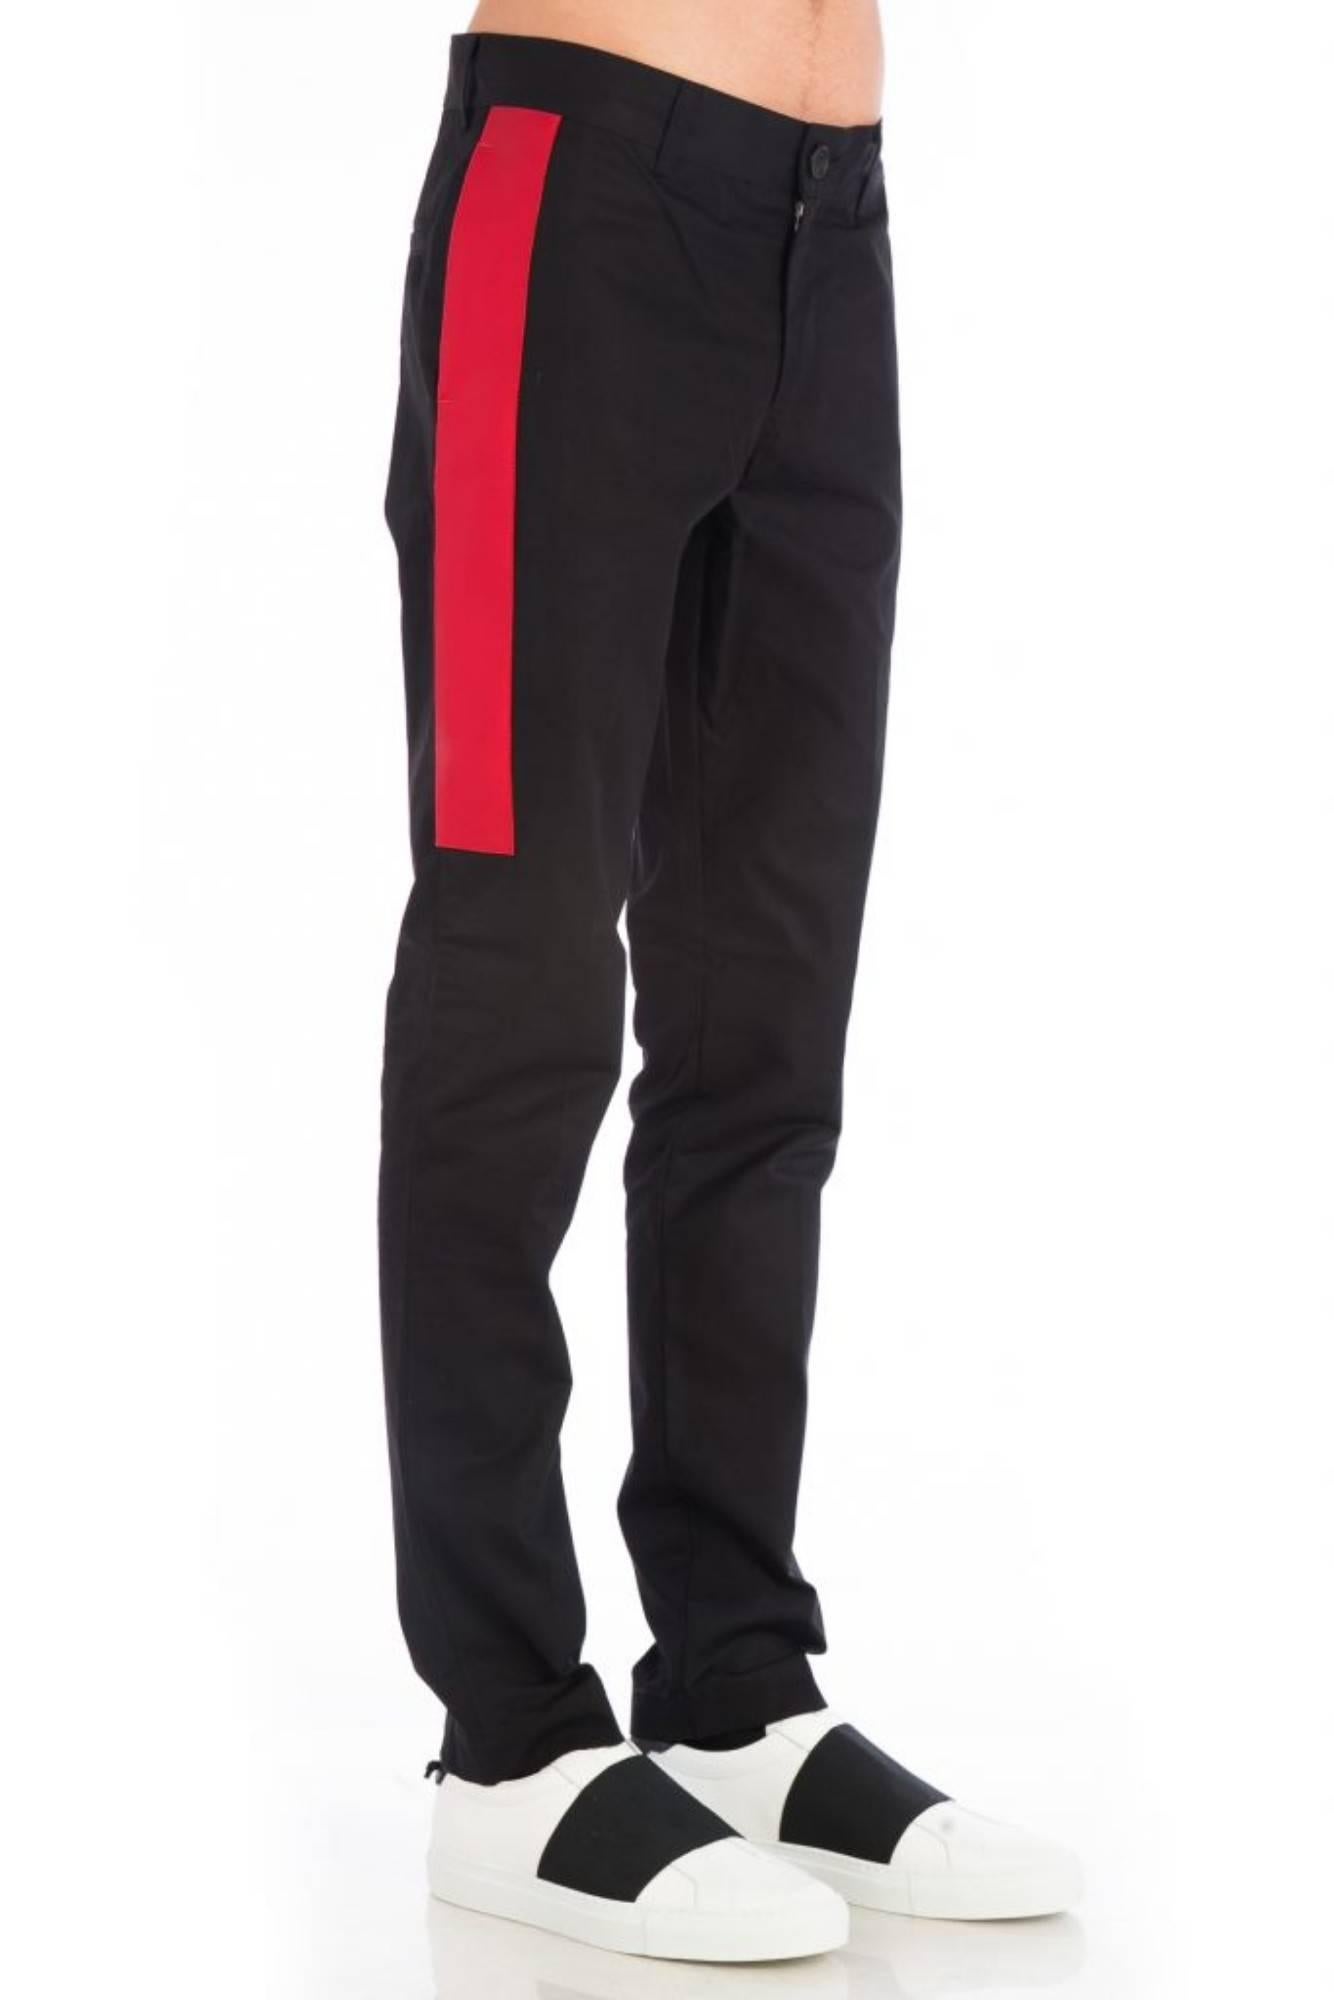 Side Stripe Trousers
Black tailored trousers
Red stripes on both sides
Mid-rise waistband
Button and zip fly fastening
Side seam pockets
Two rear welt pockets
Composition 100% cotton